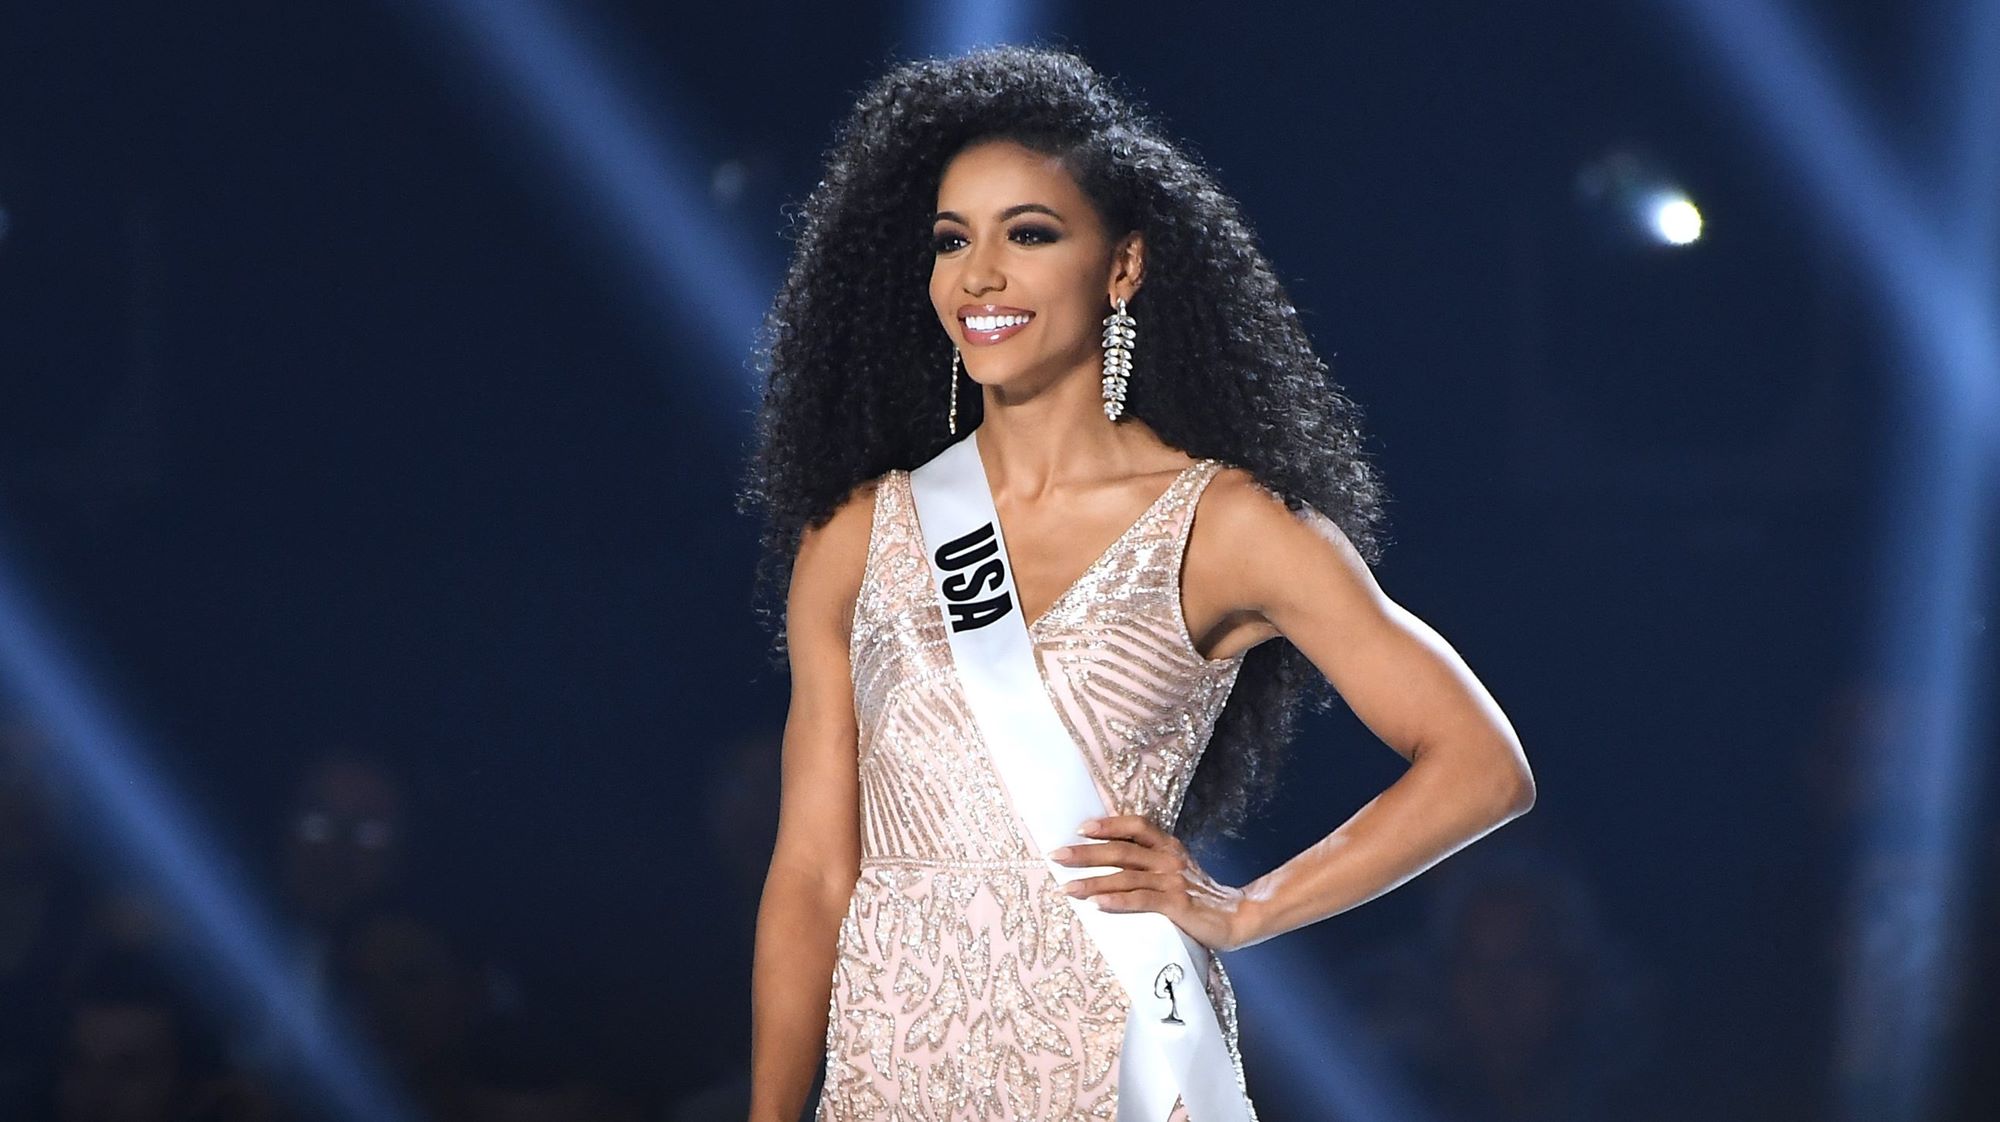 How To Watch Miss USA CitizenSide